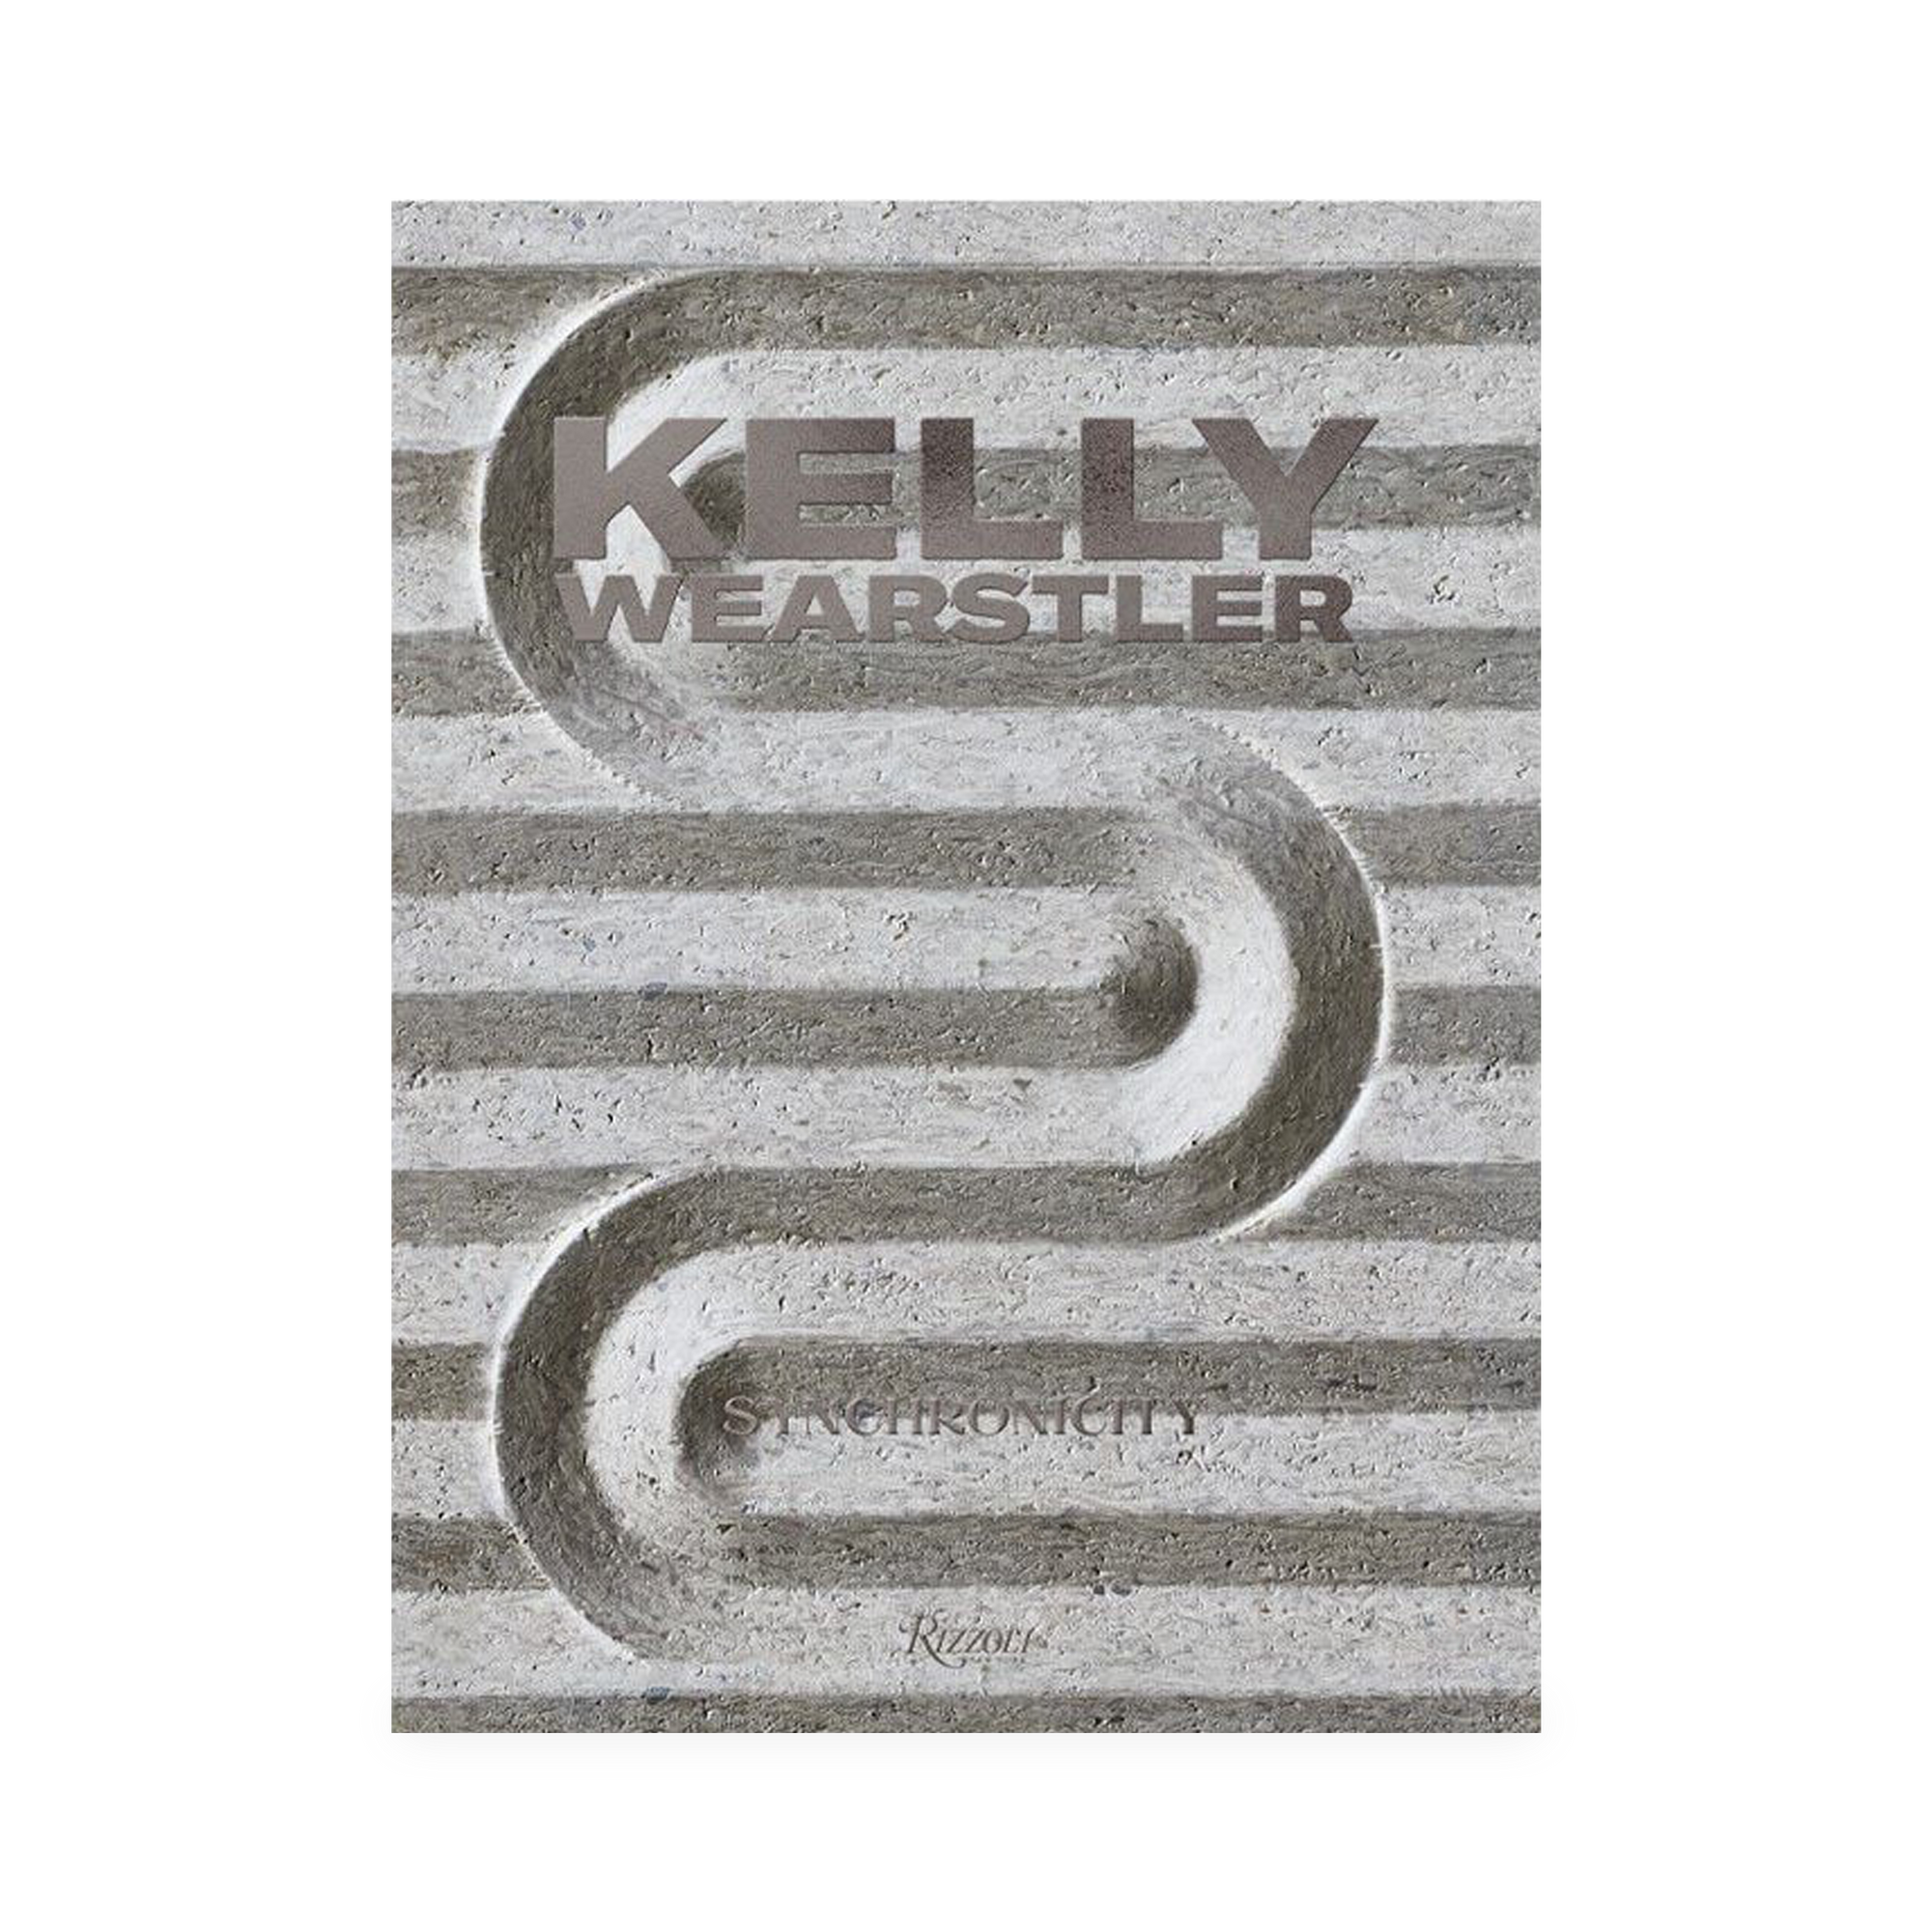 Kelly Wearstler's sixth book, Synchronicity, is her first new book in four years.